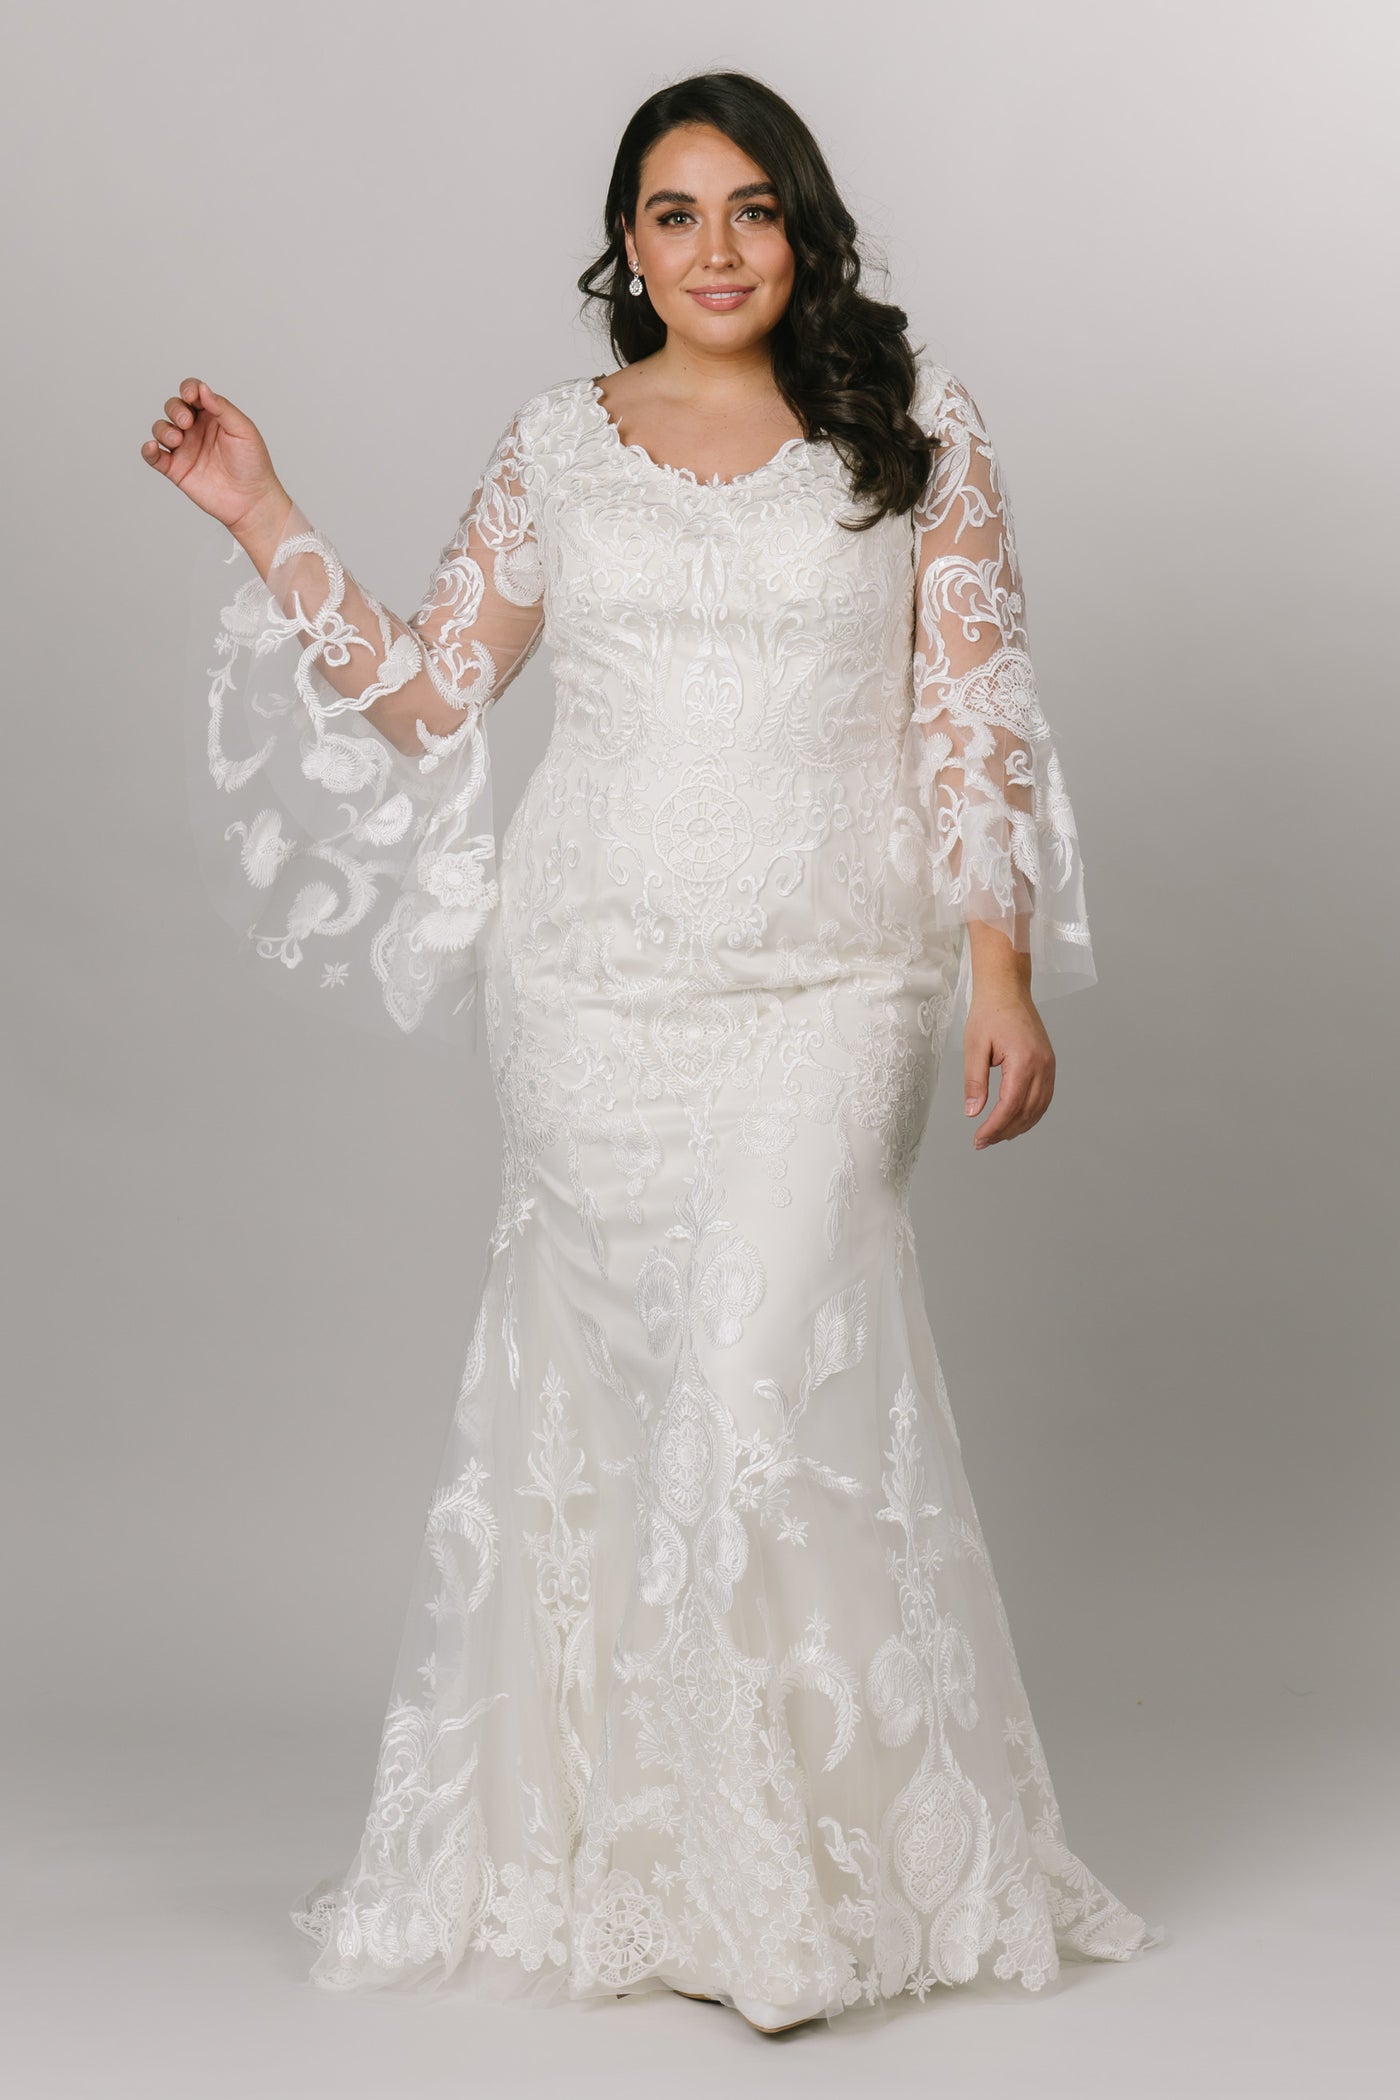 Front view of a modest wedding dress features a stunning lace pattern over a fitted silhouette.